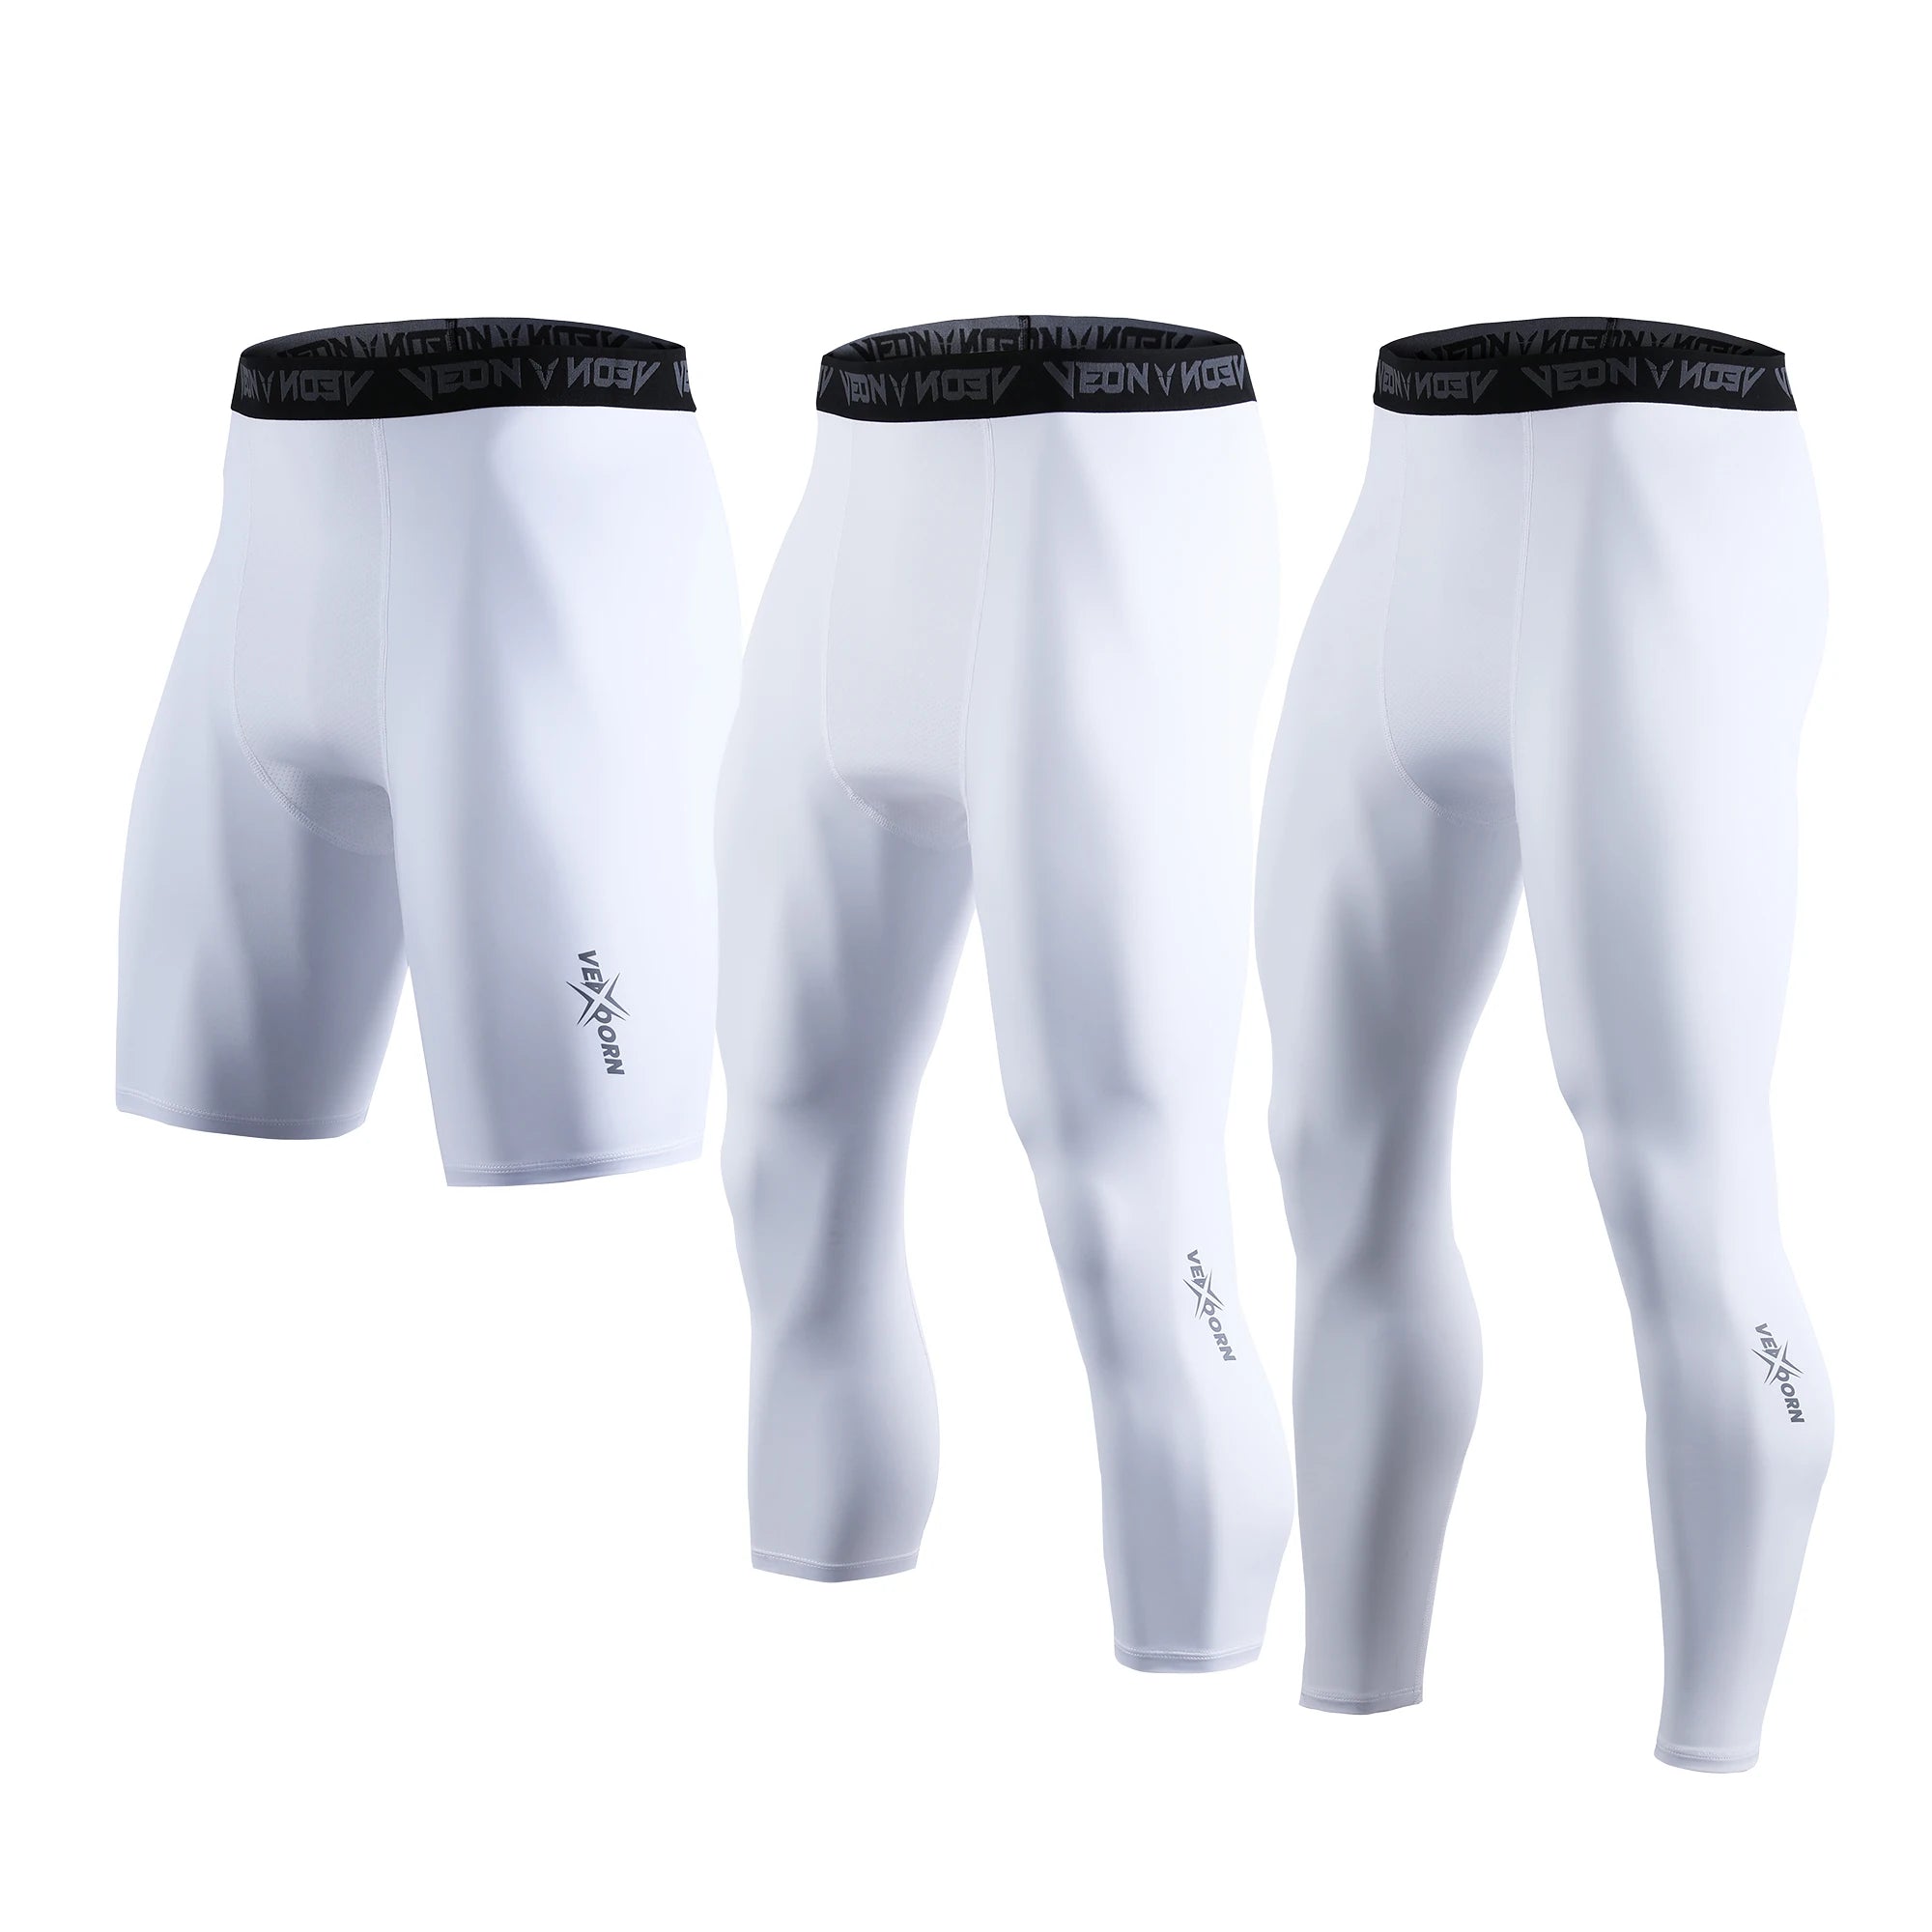 High Quality Mens Athletic Training Sport Compression Quick Dry Tights Leggings